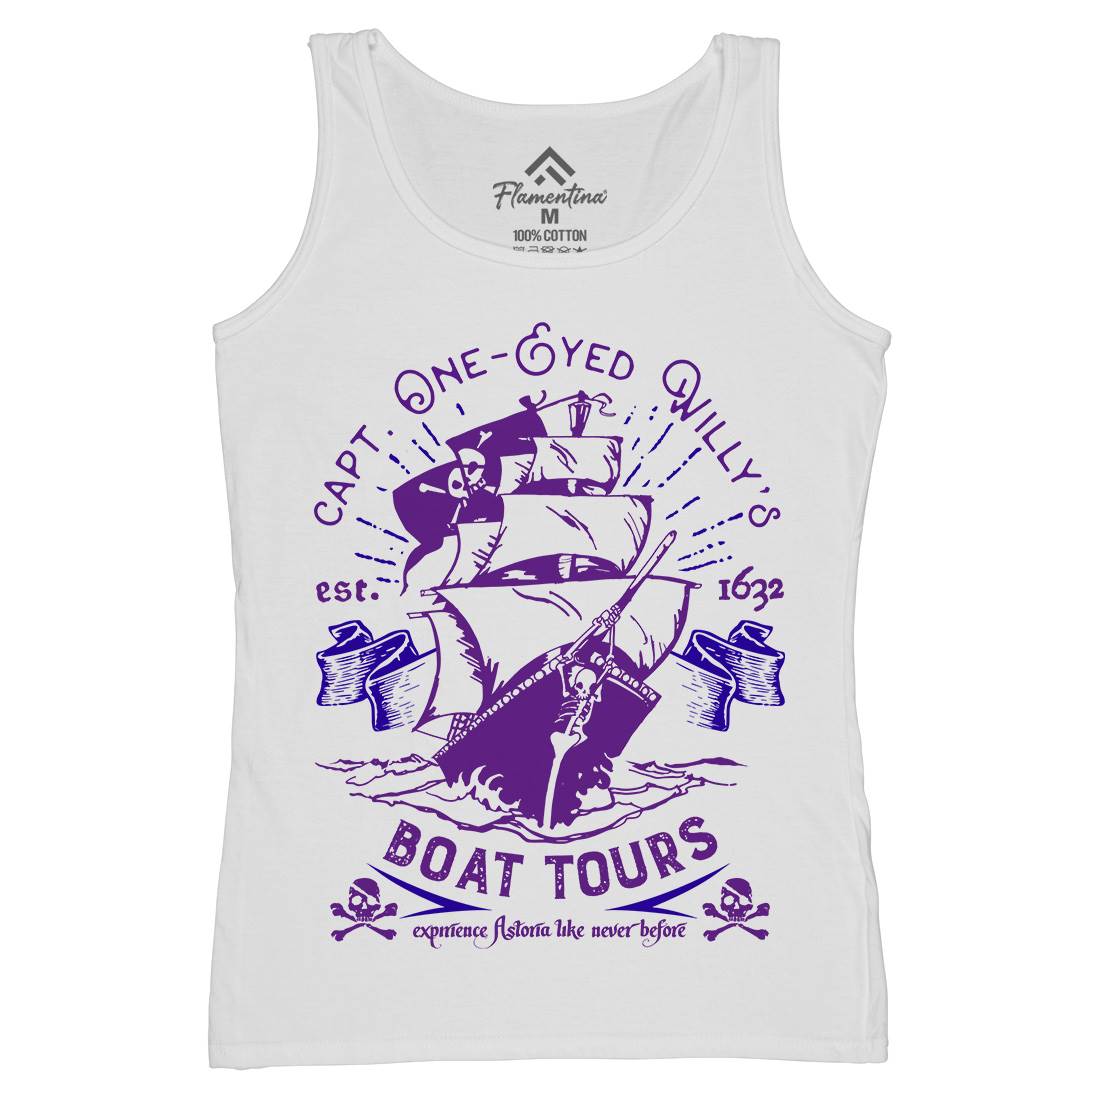 One-Eyed Willys Boat Tours Womens Organic Tank Top Vest Horror D160